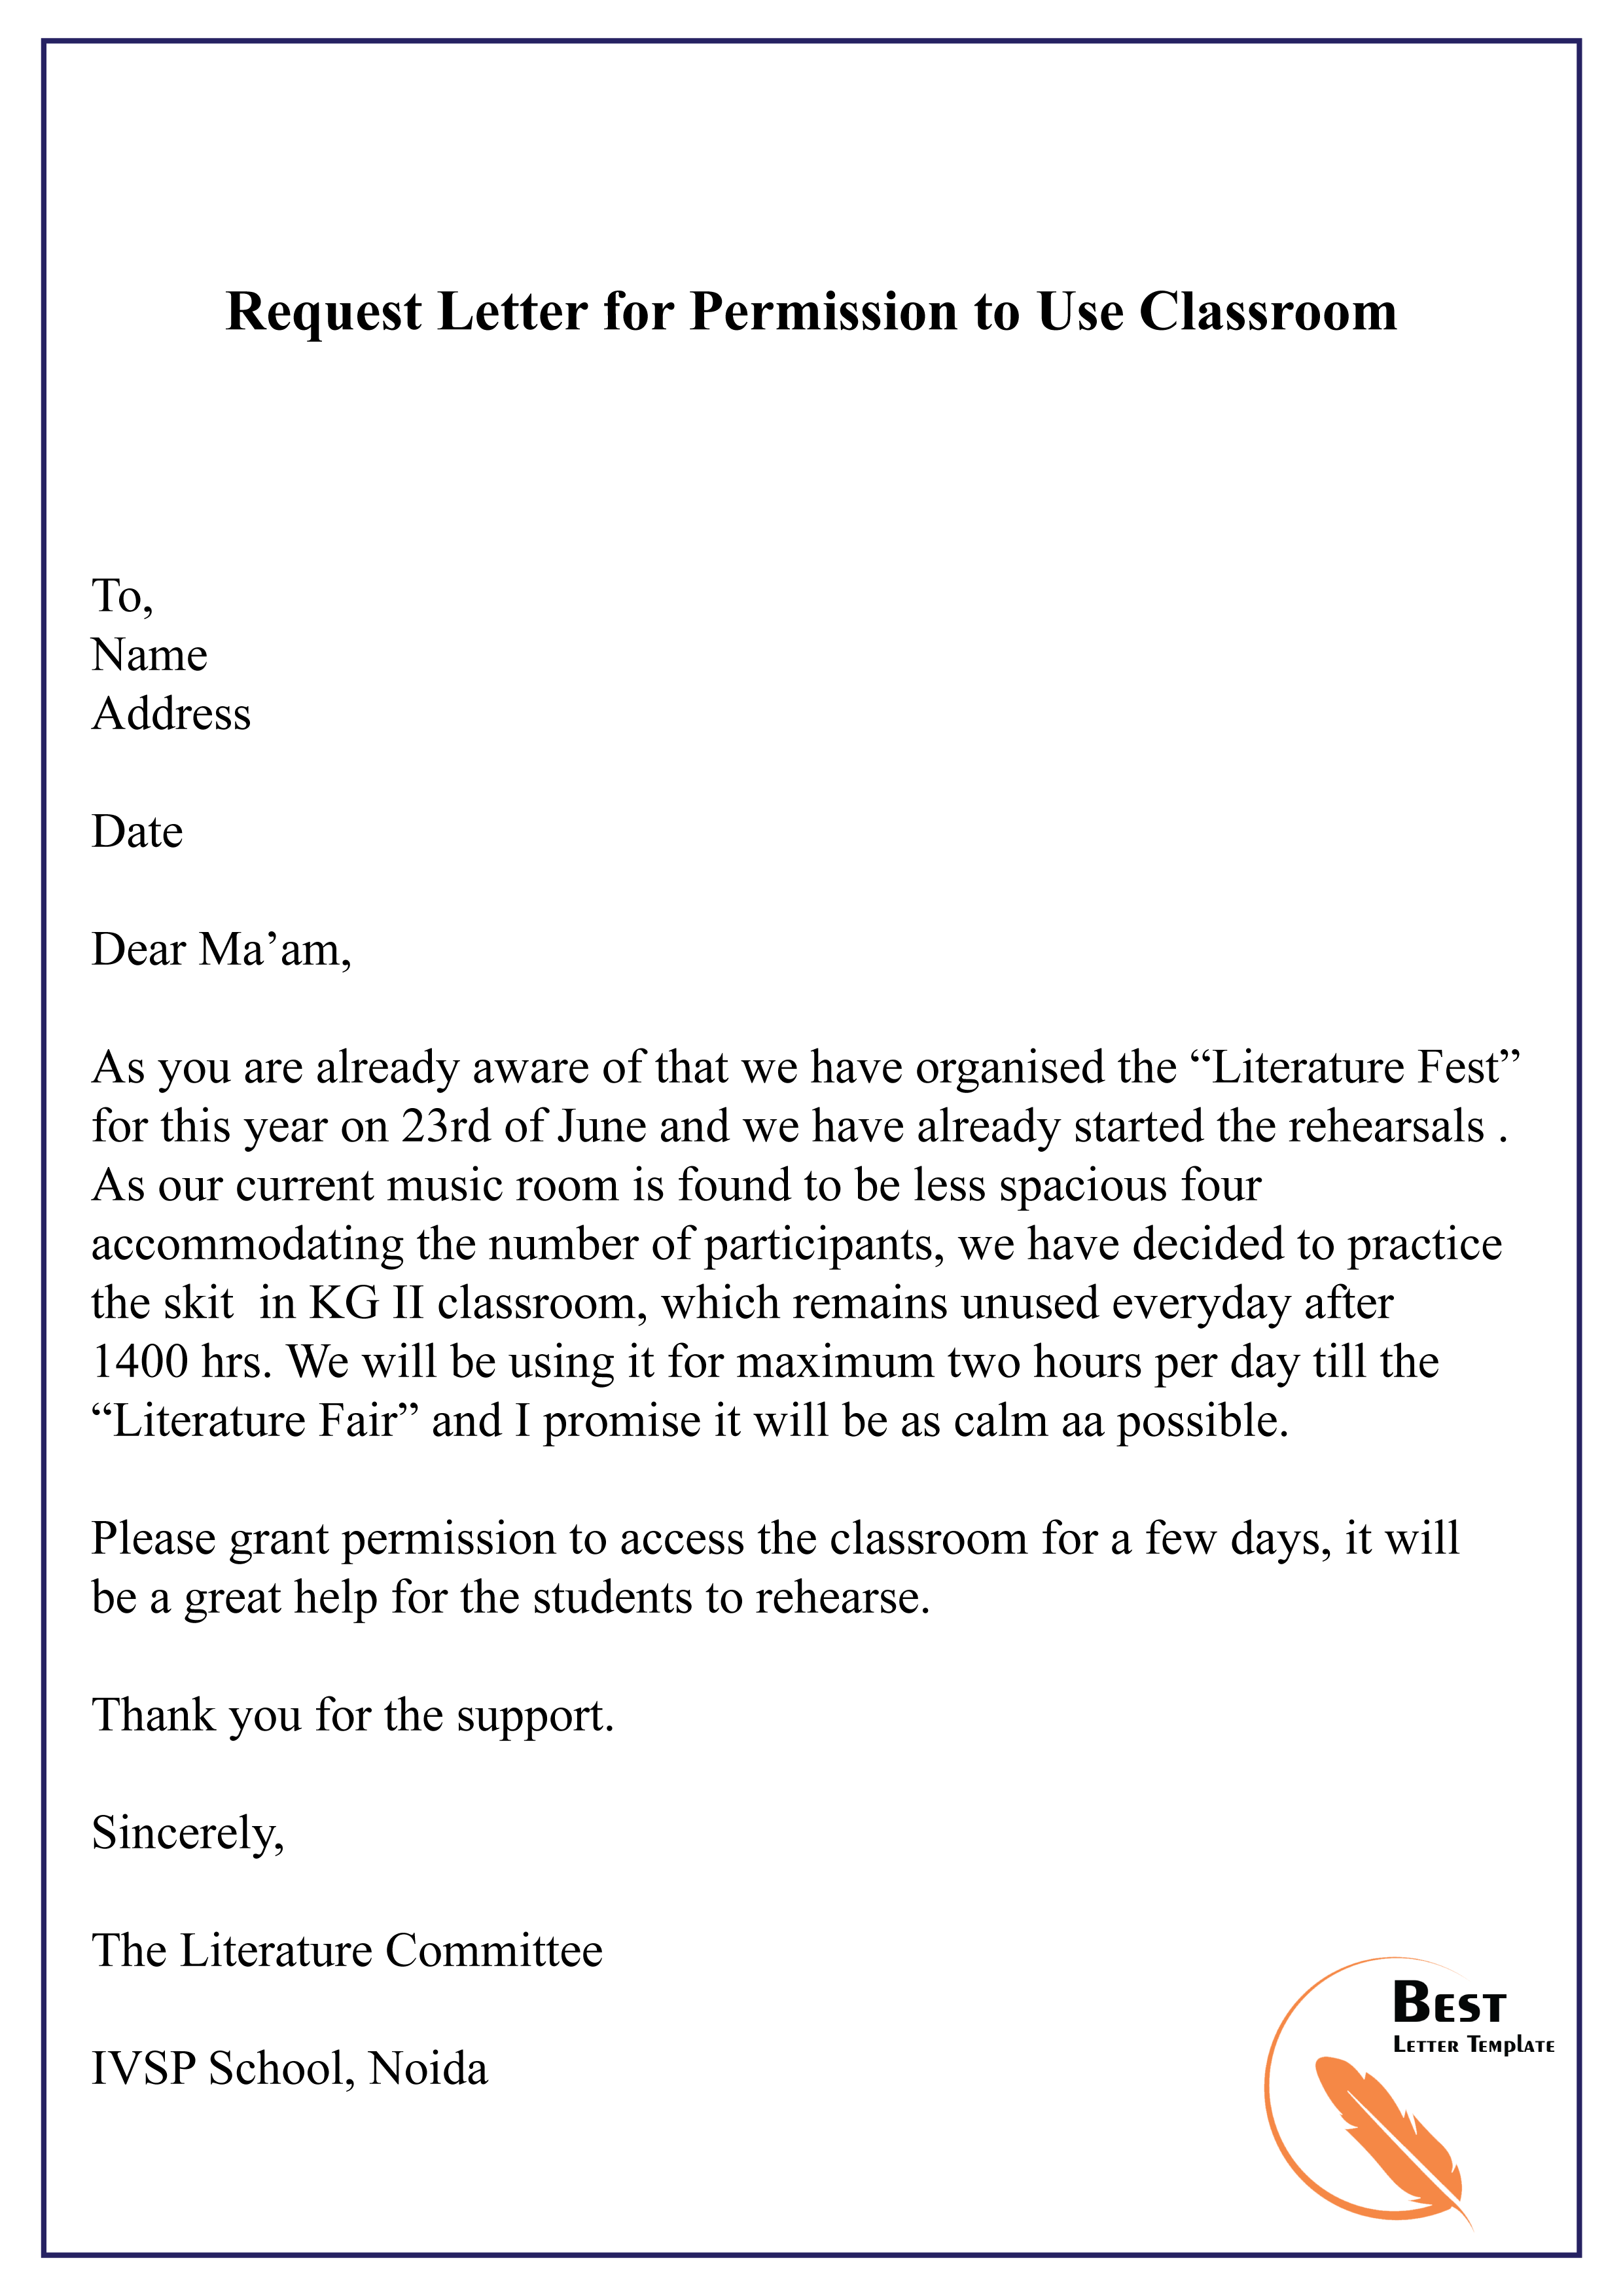 Request Letter For Permission To Use Equipment Best Template Format